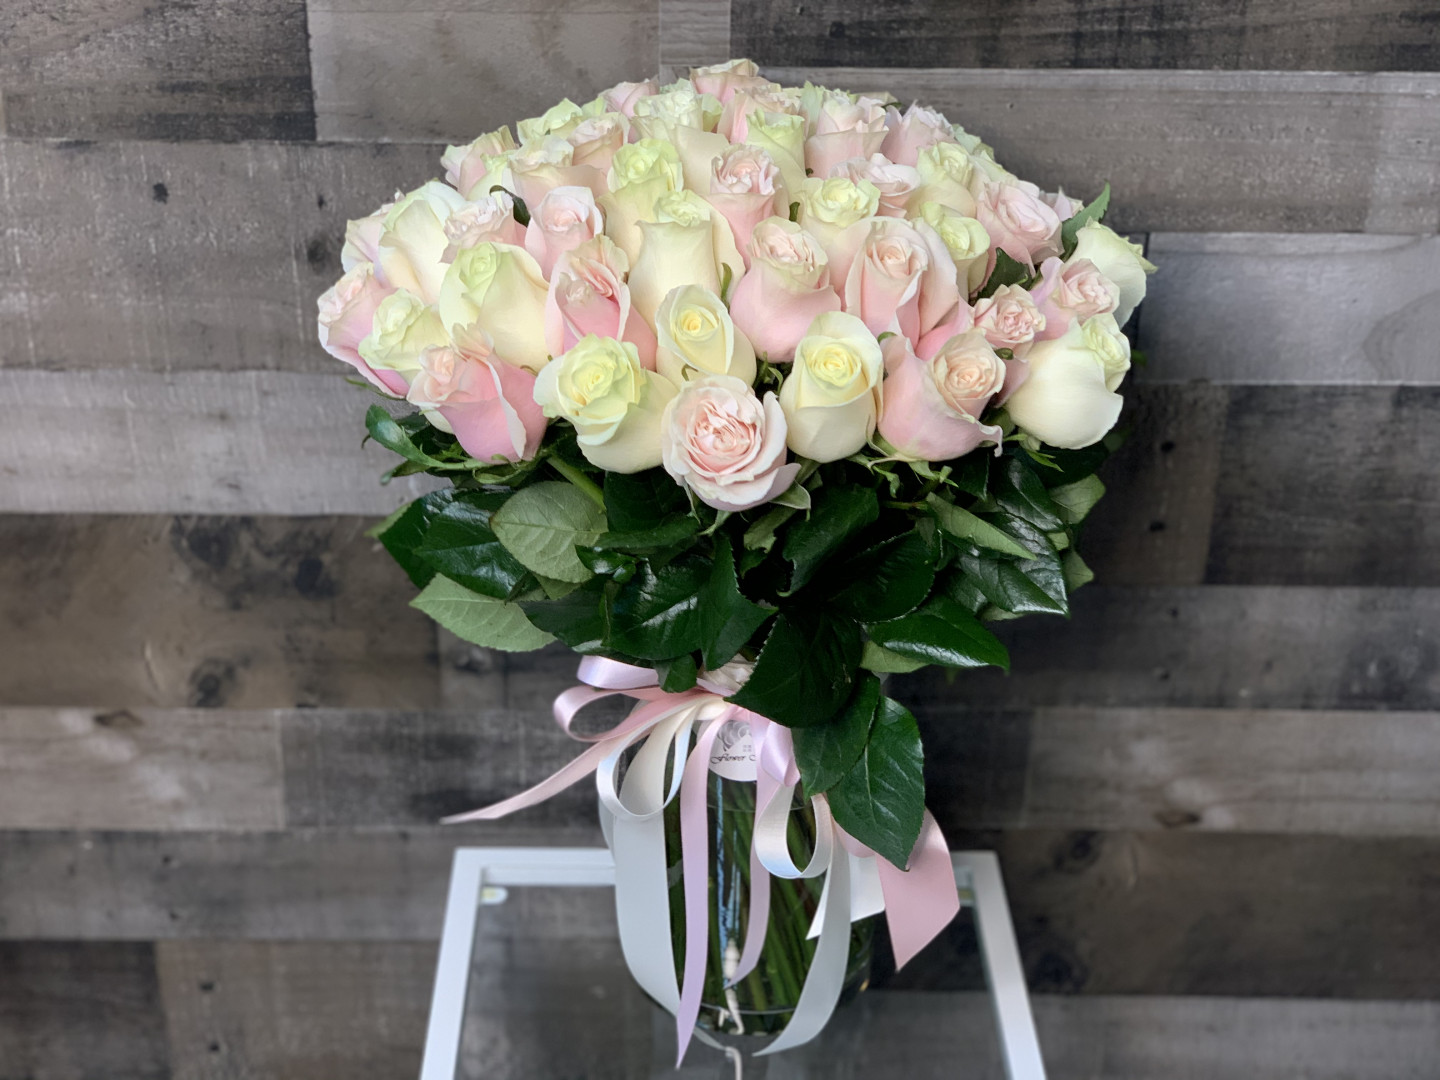 50 Light Pink & White Roses Bouquet